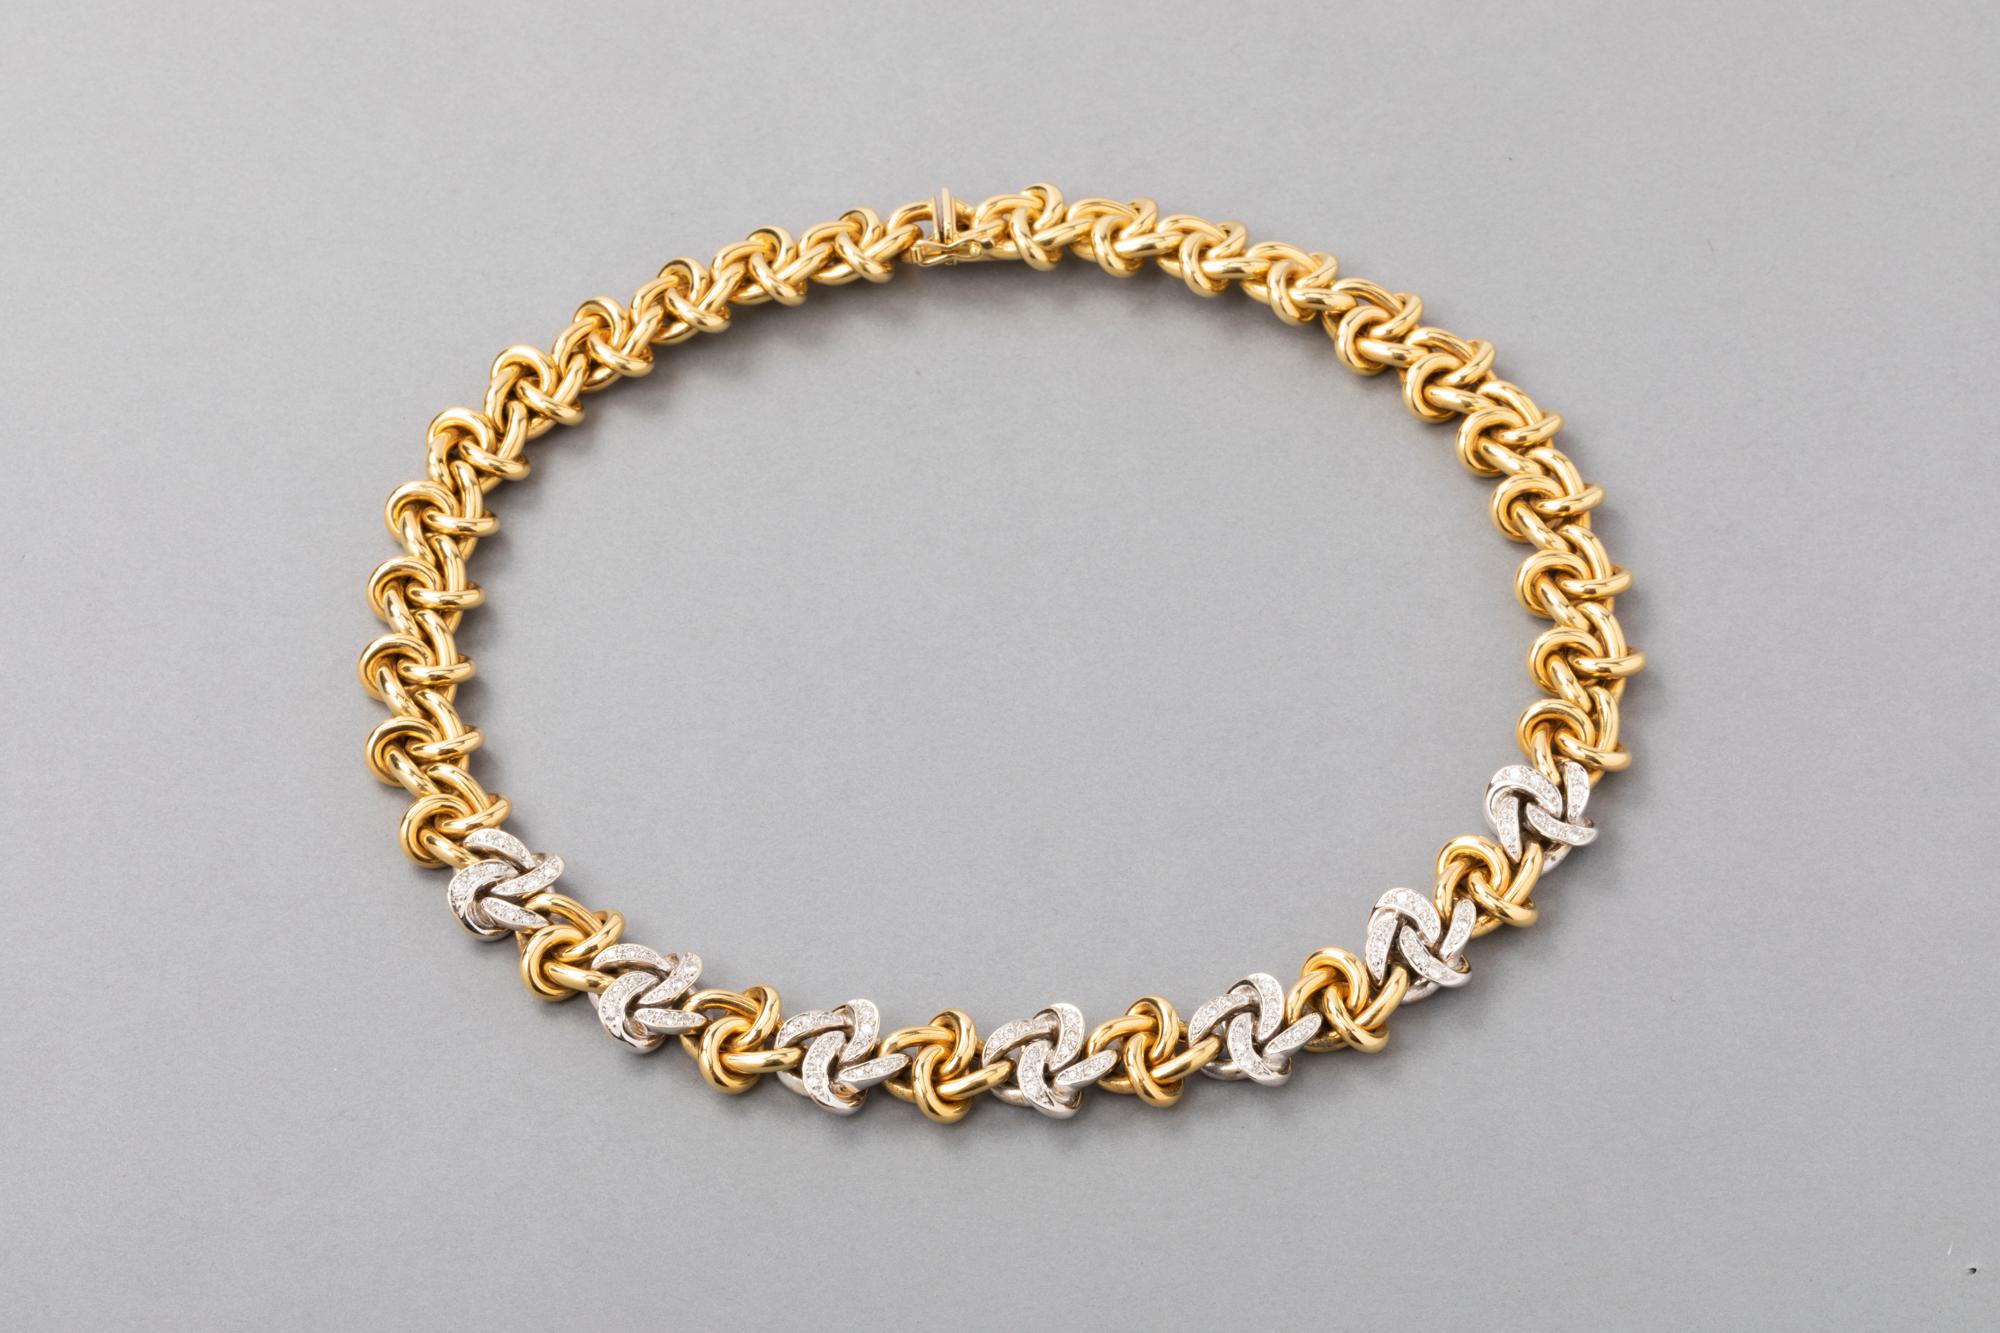 Gold and Diamonds Fashion Necklace

Beautiful necklace, made in France circa 1980.  
Marks fort gold 750. Mounted in yellow gold 18k and diamonds.  
The diamonds weights 1.5 carats estimate. 
The necklace is heavy, this is a sign of good quality, it